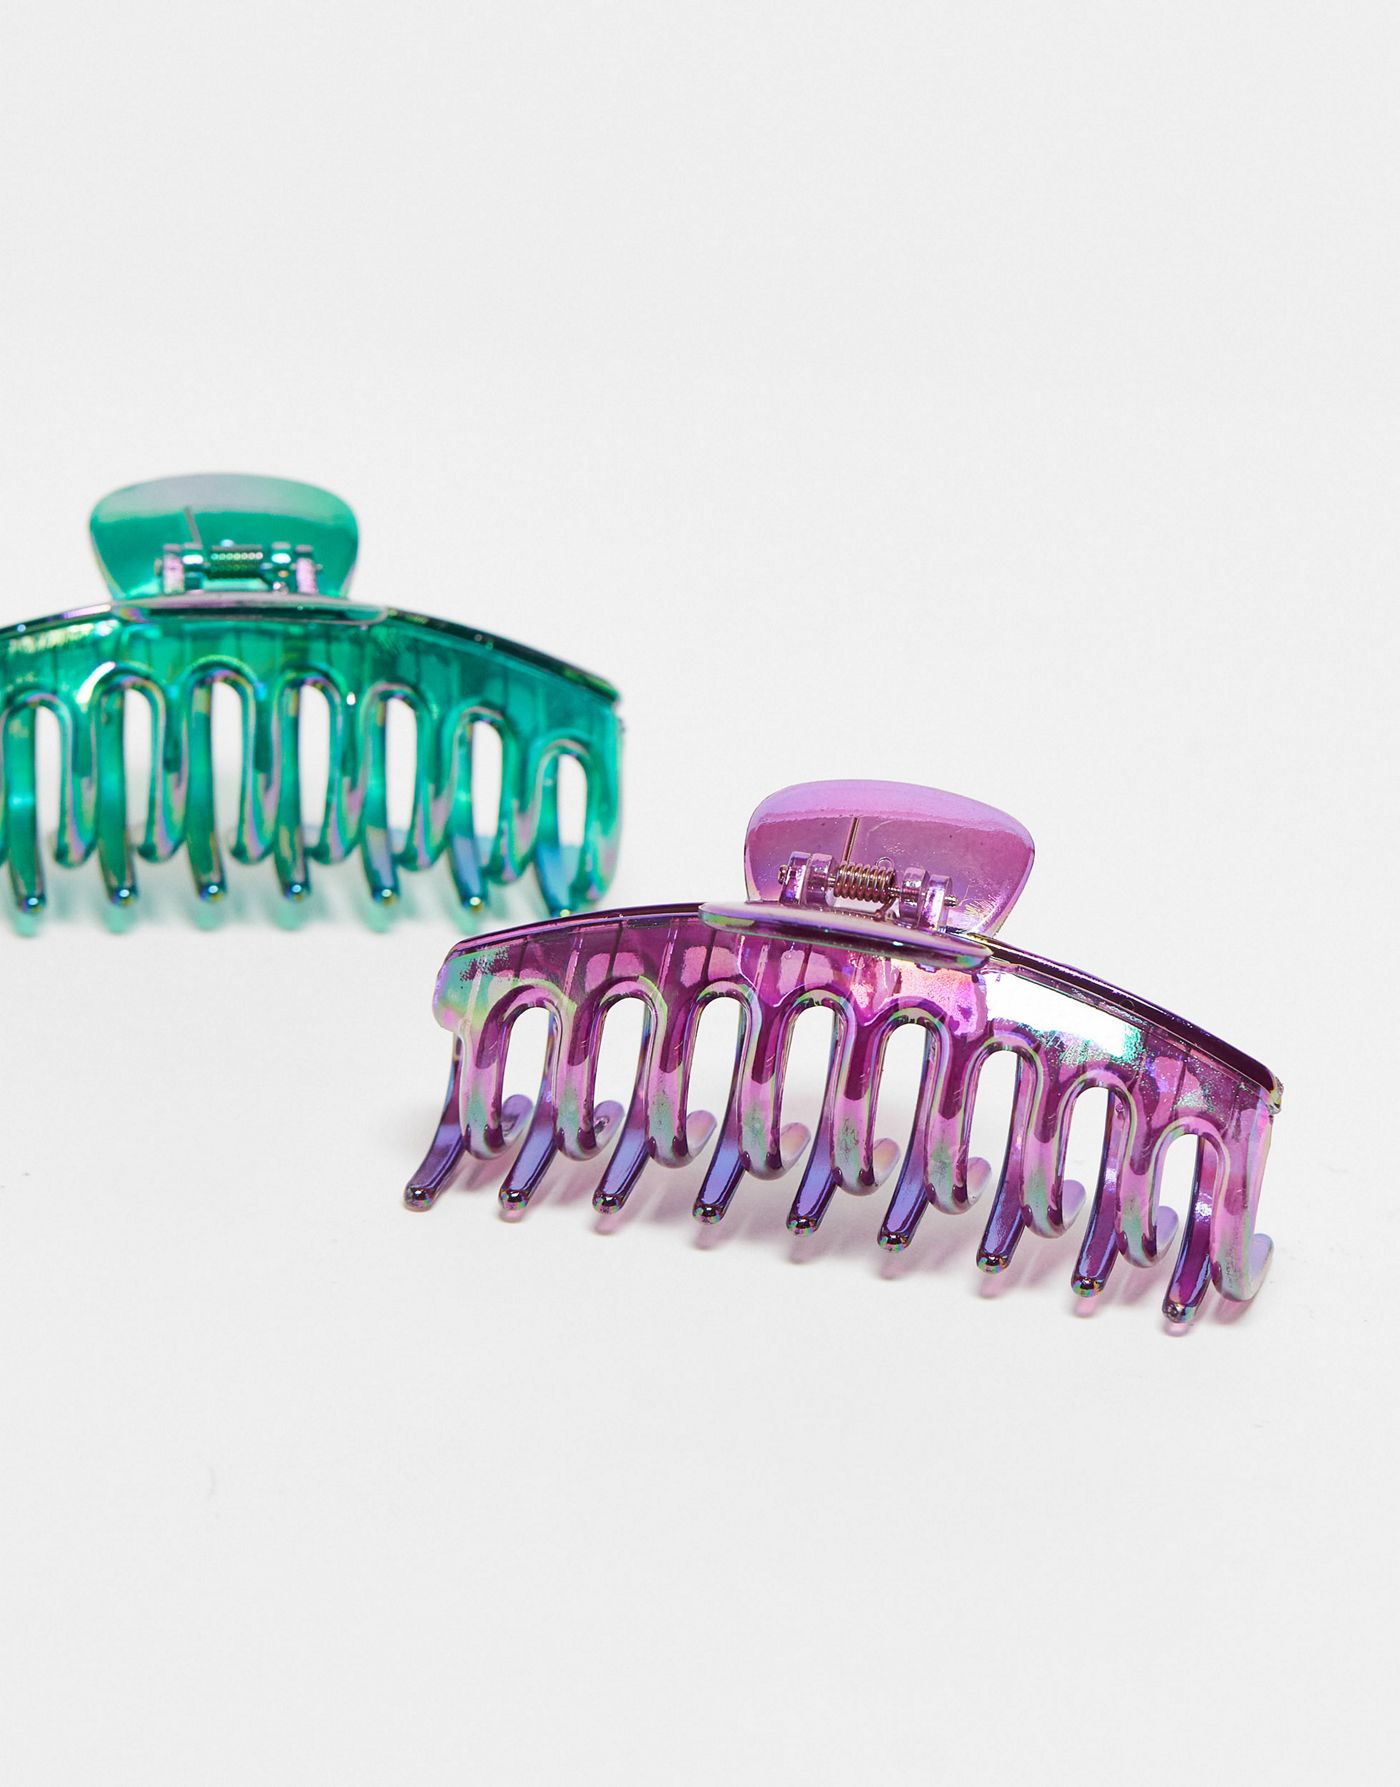 DesignB London iridescent 2 pack of hair claws in purple and green